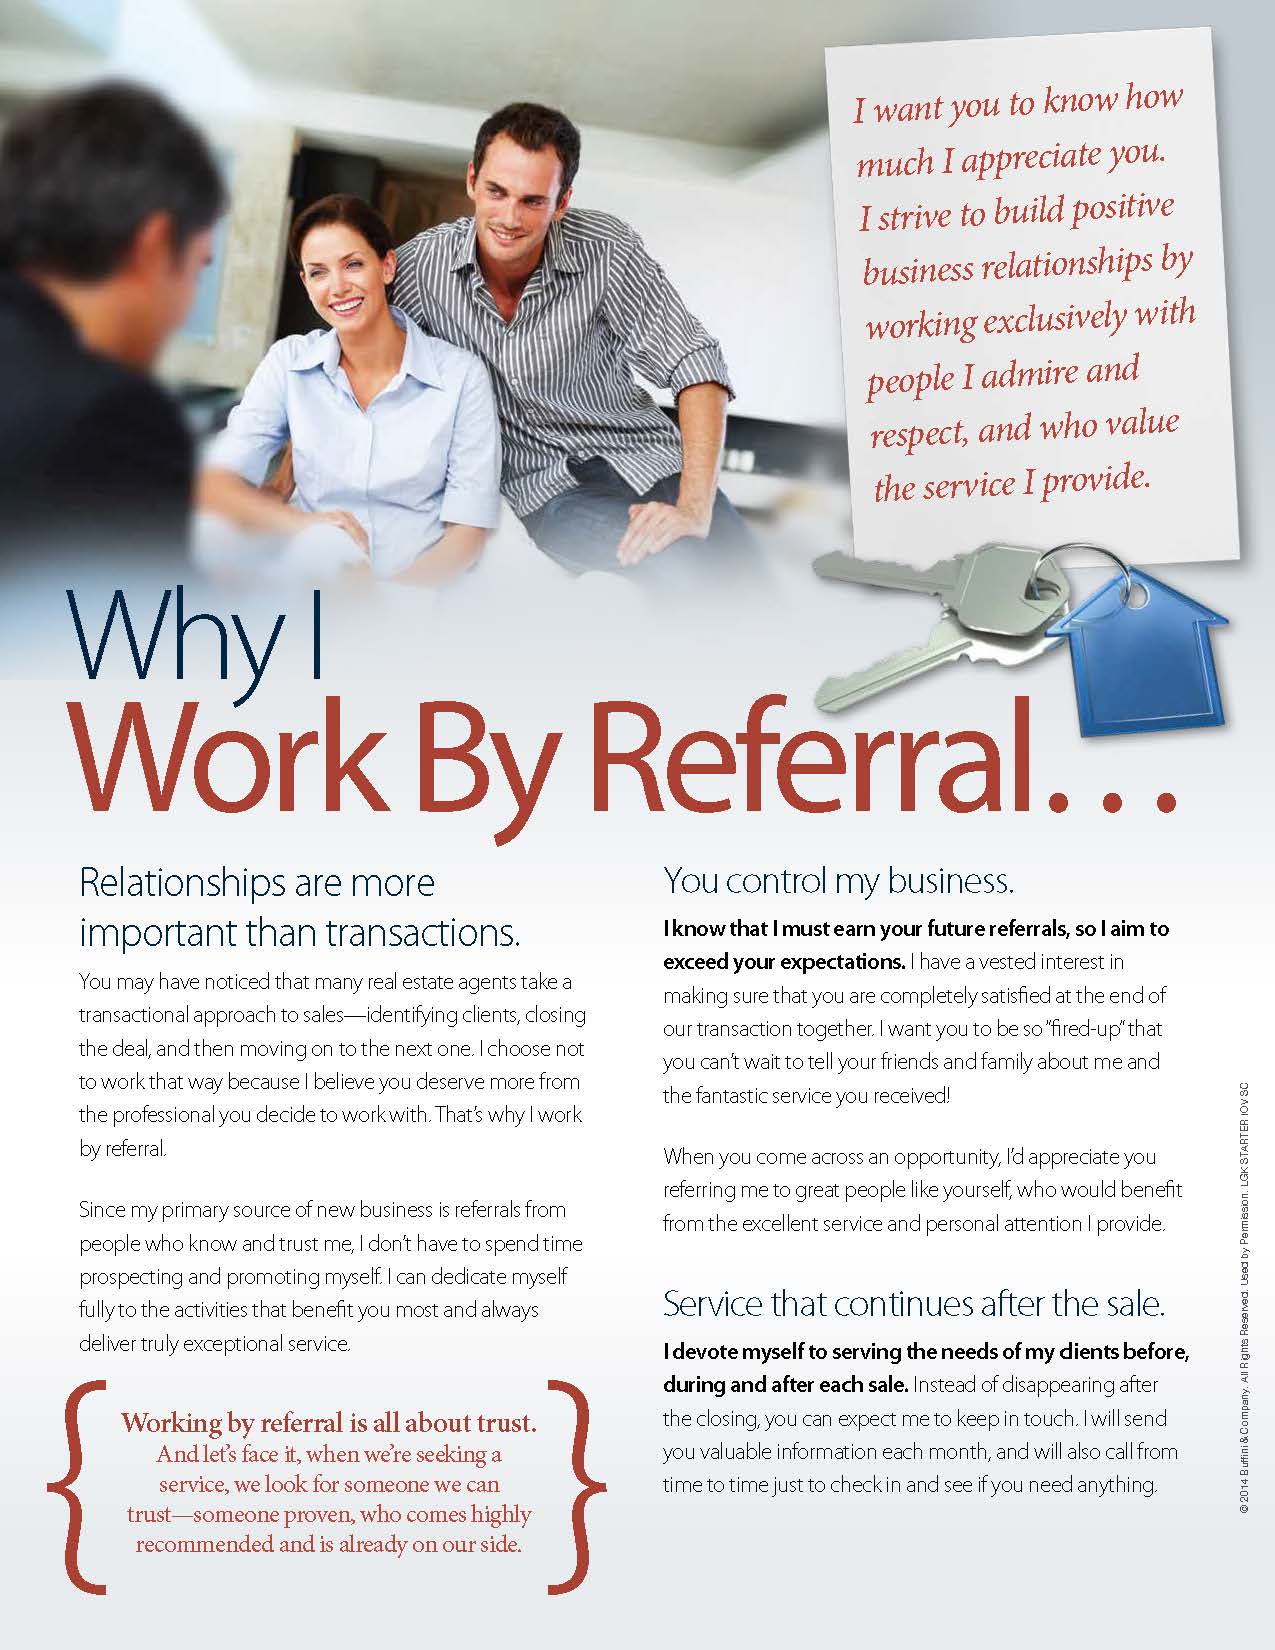 Why I Work By Referral